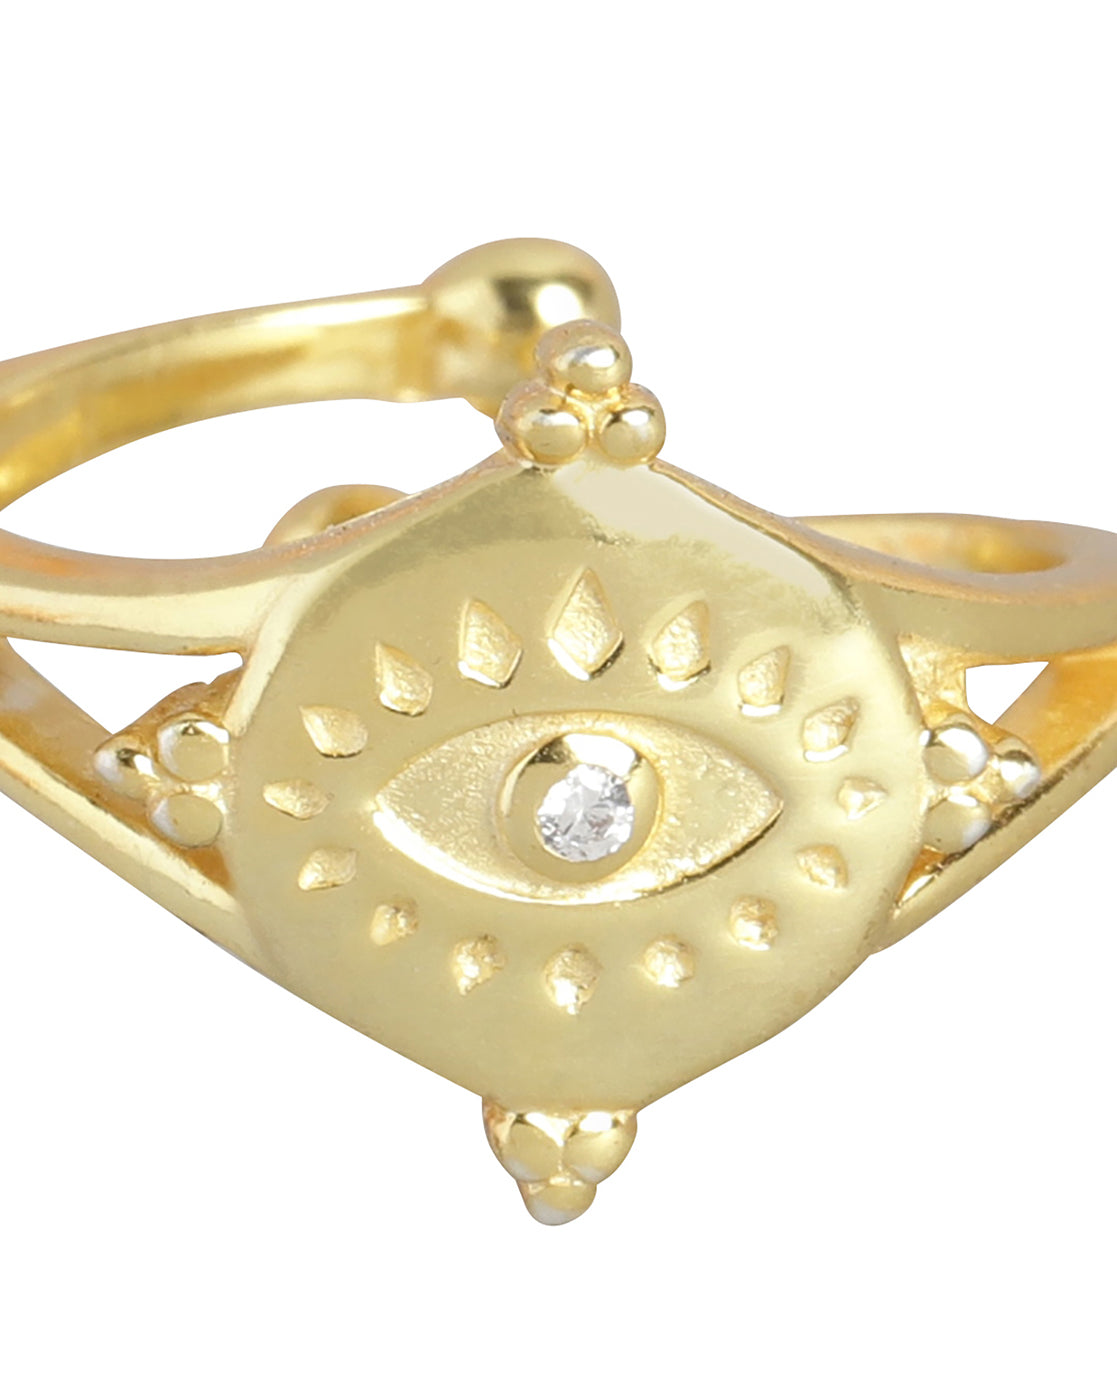 Carlton London Gold Plated Cz Studded Eye Contemporary Adjustable Finger Ring For Women